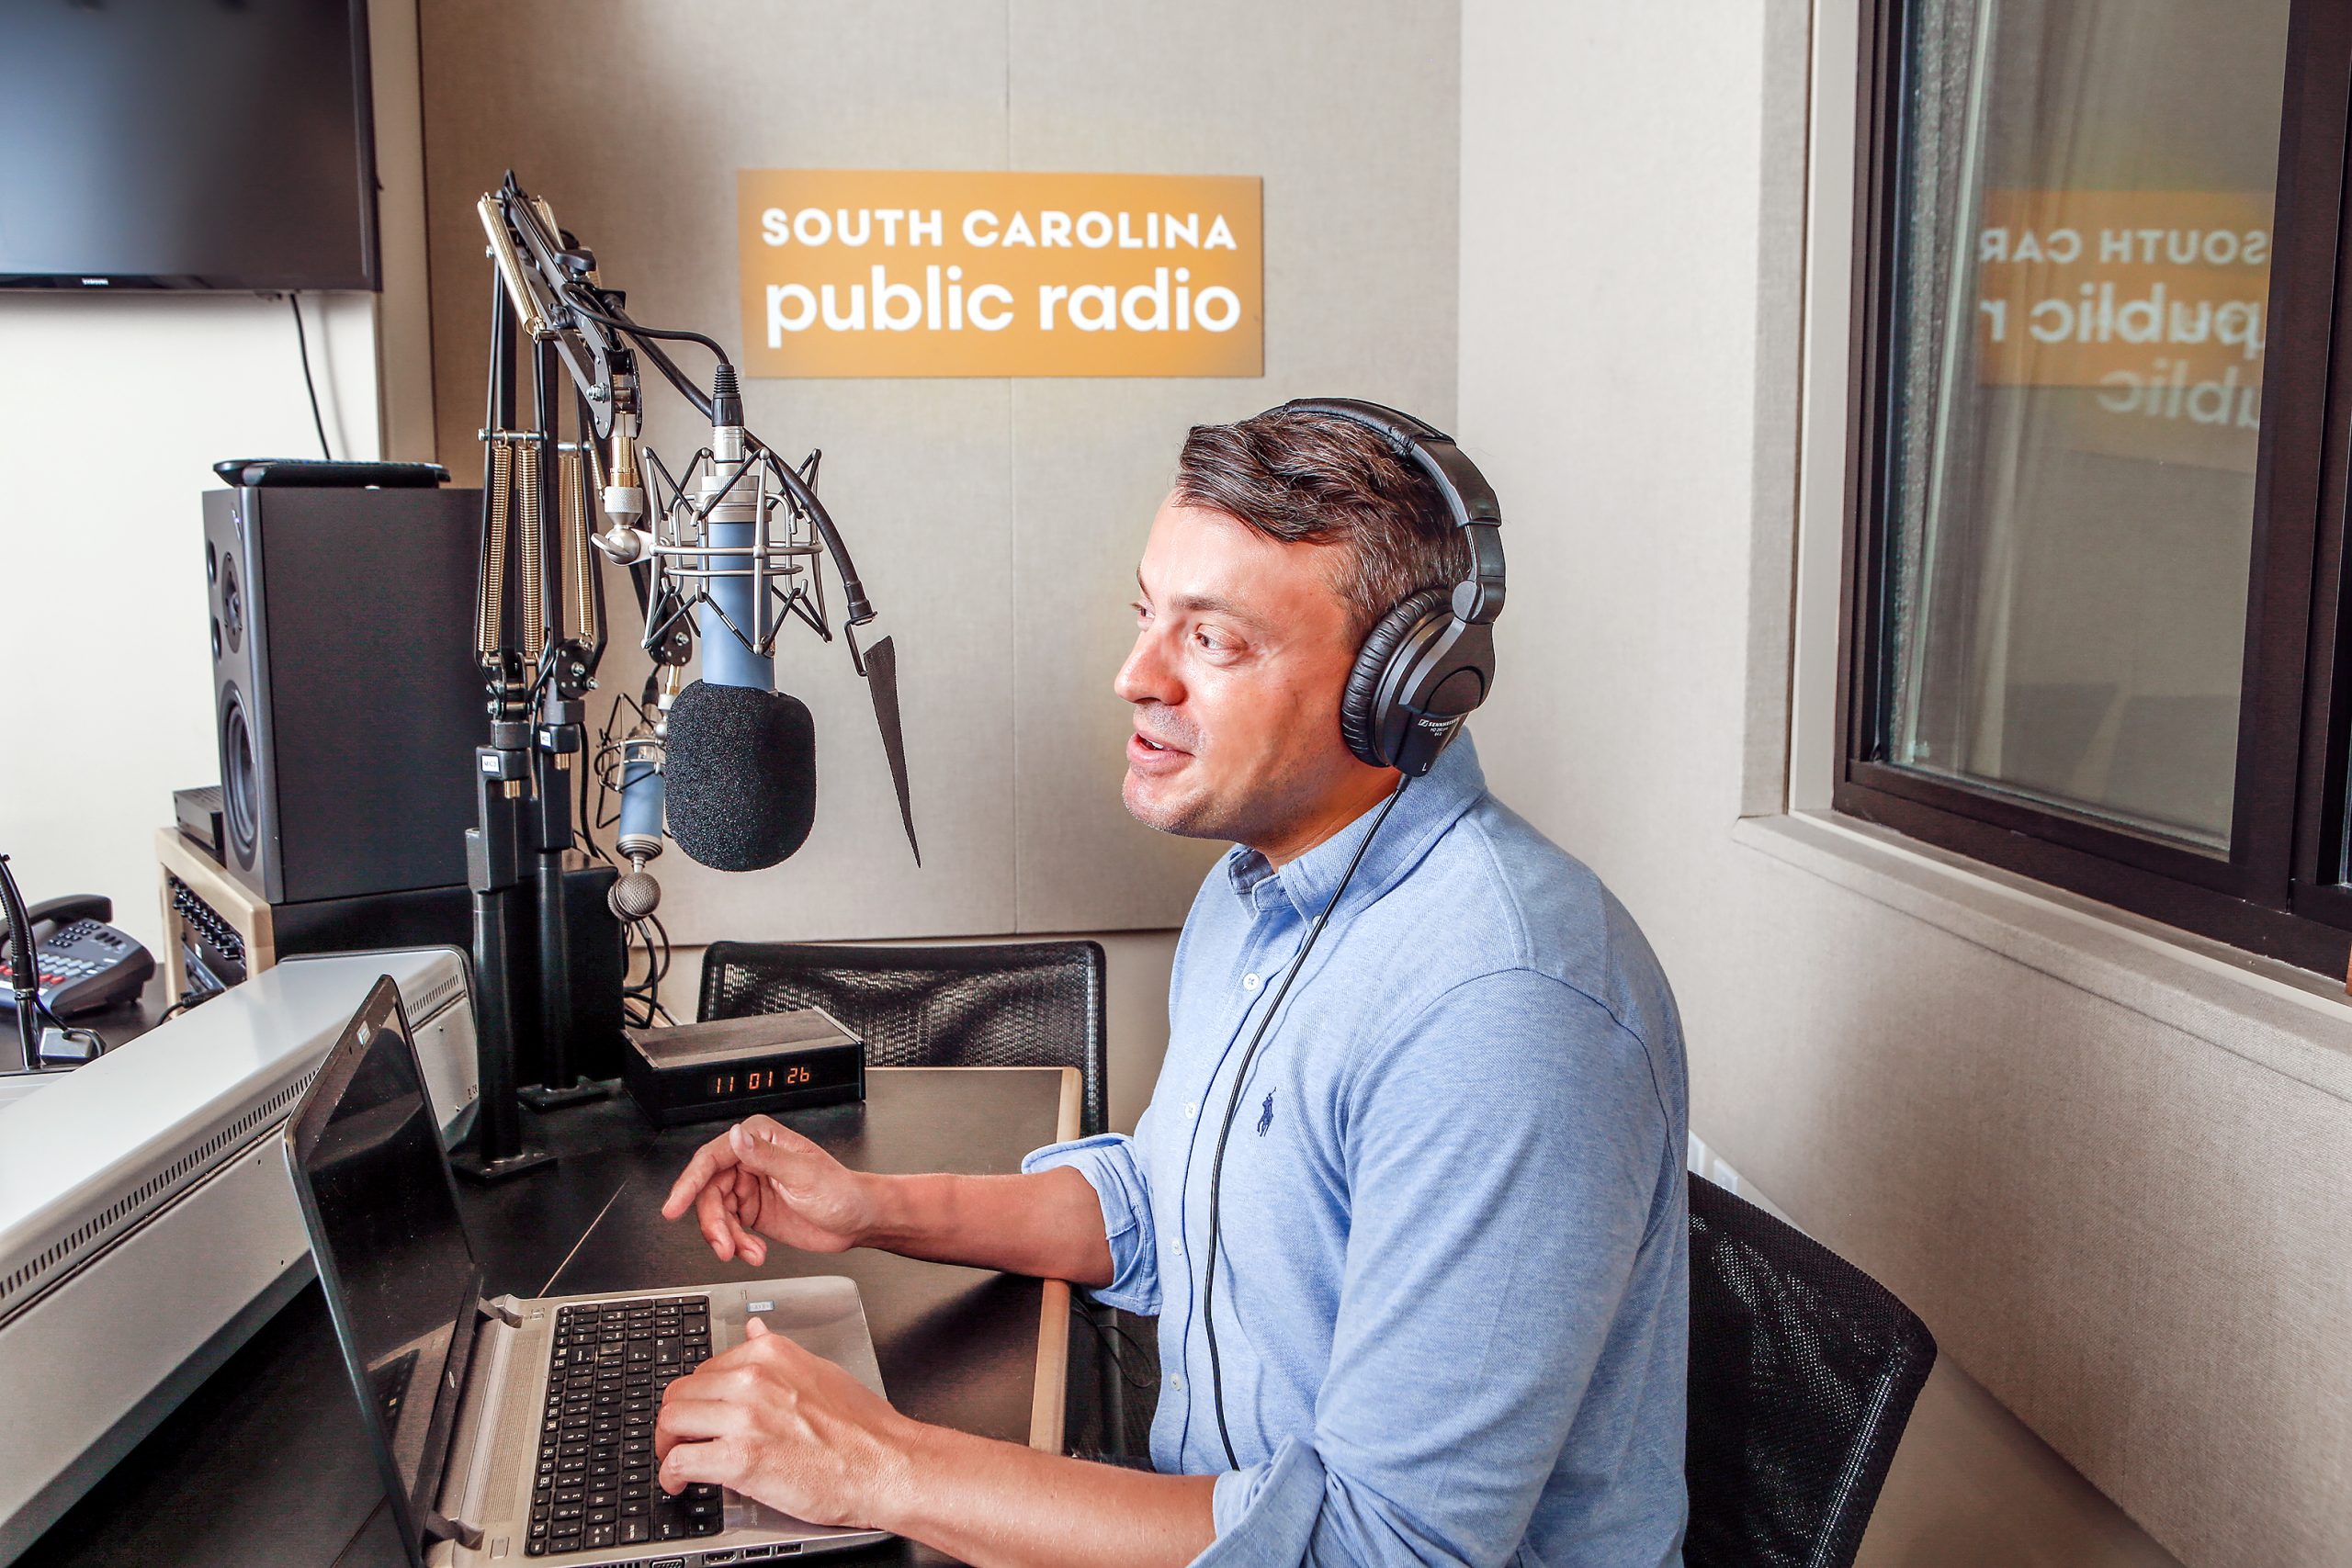 Gavin Jackson, with a background in news from years of newspaper reporting, is the host of the news podcast, The South Carolina Lede, which started in 2018.